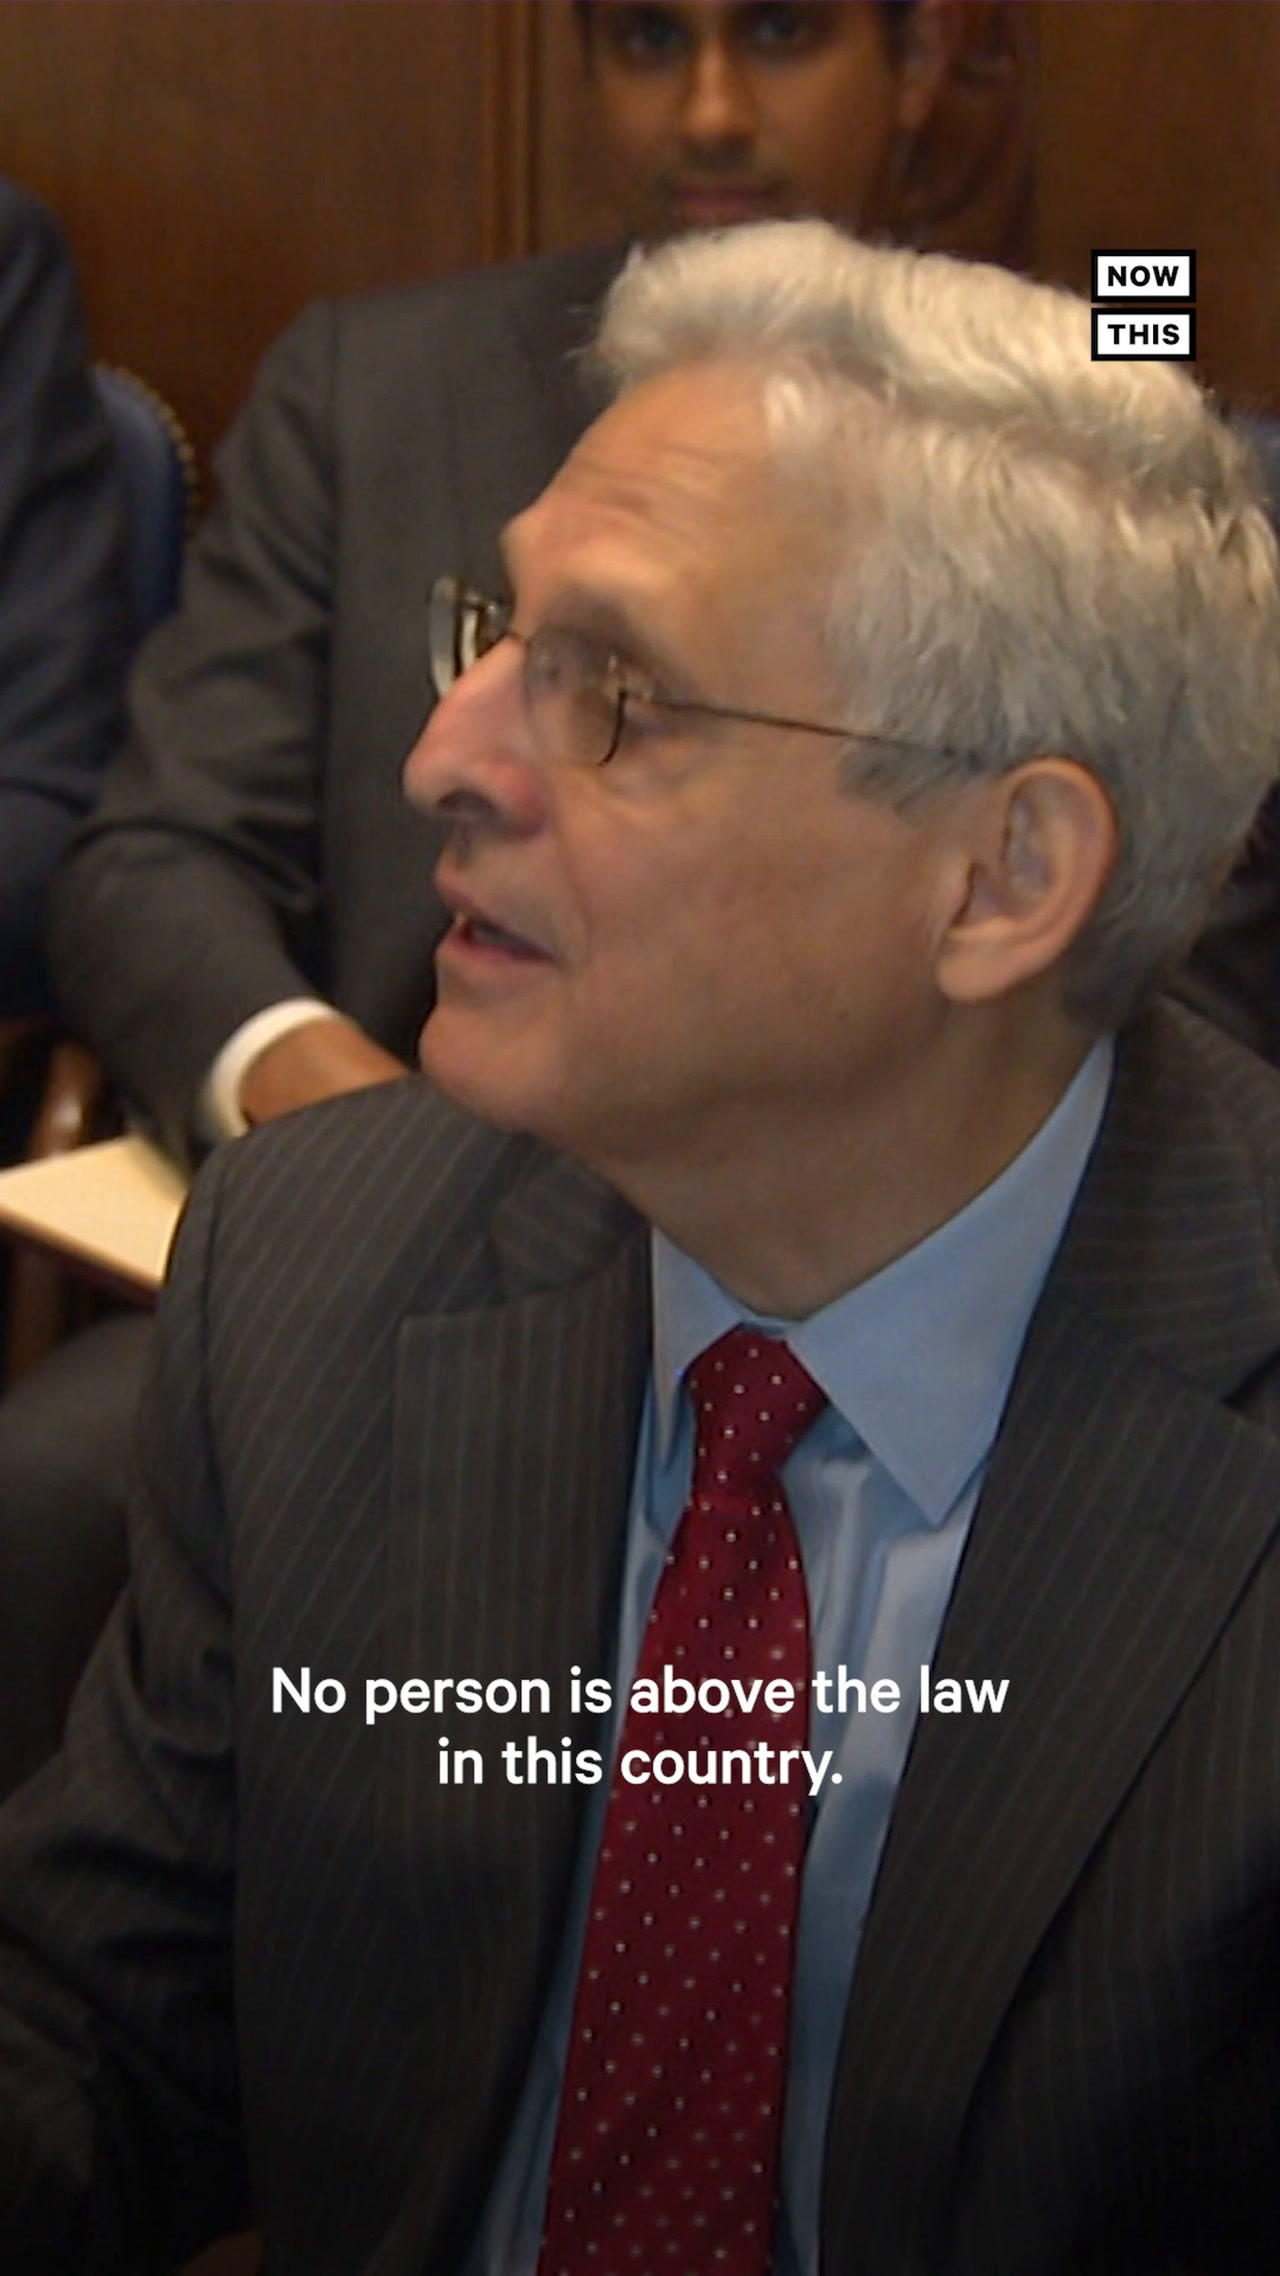 AG Garland States ‘No One is Above the Law'